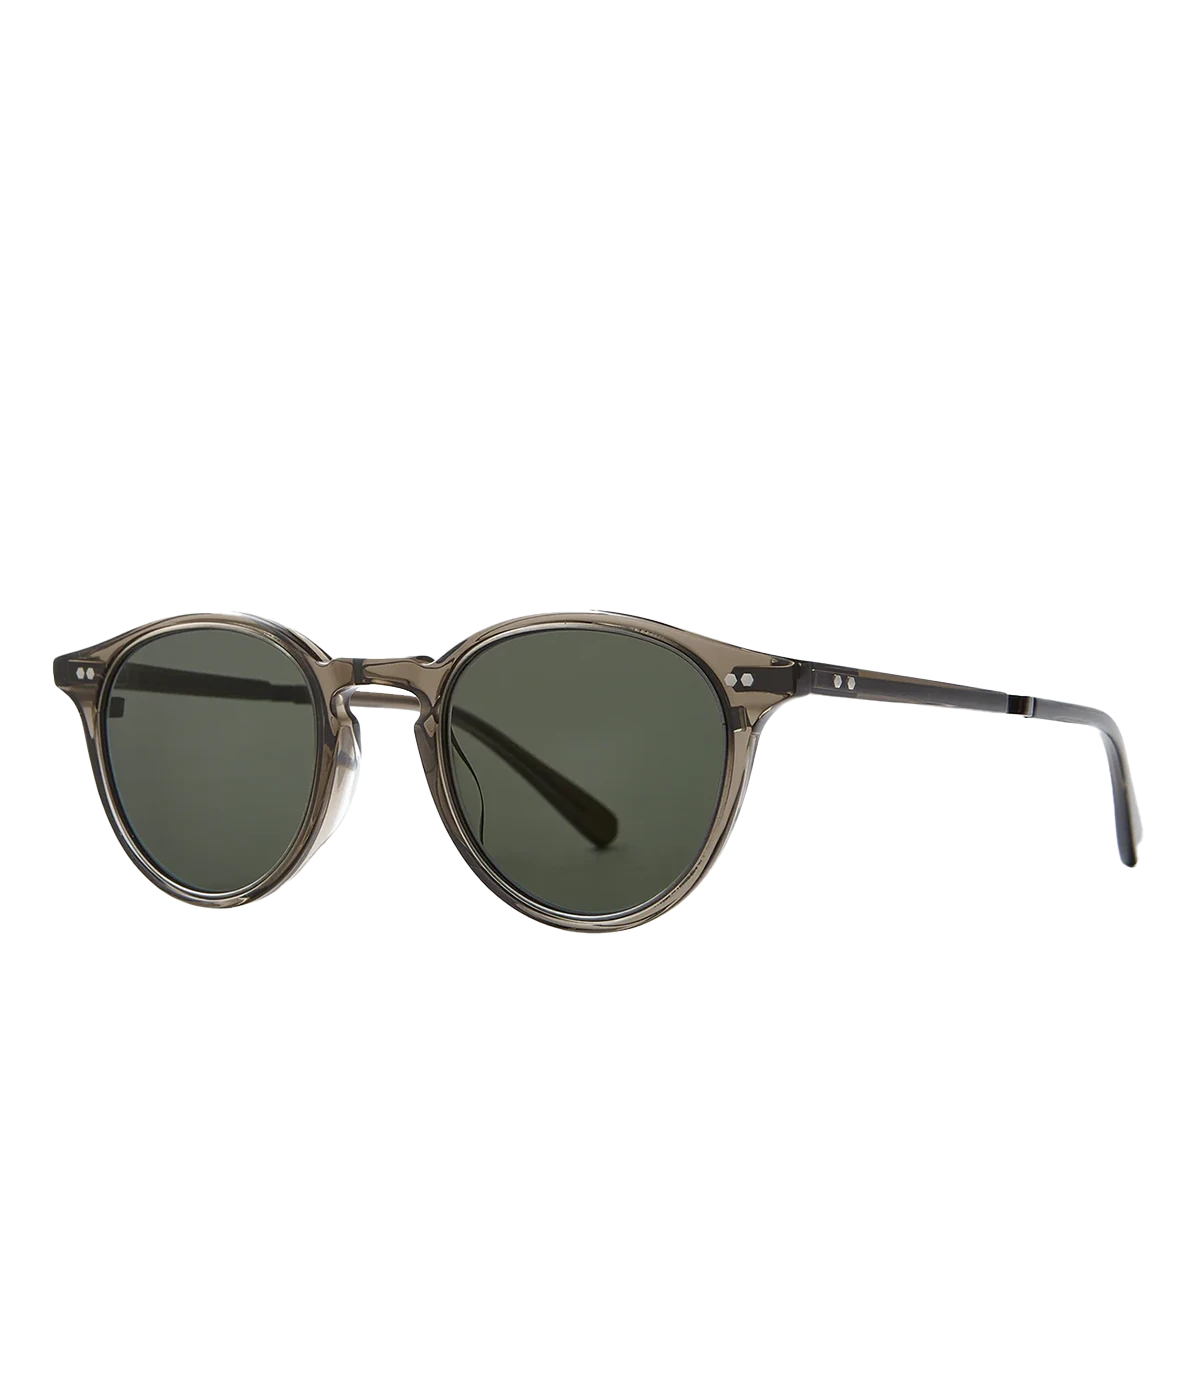 Rounded grey sunglasses with green lenses by Mr Leight, Handcrafted in Japan